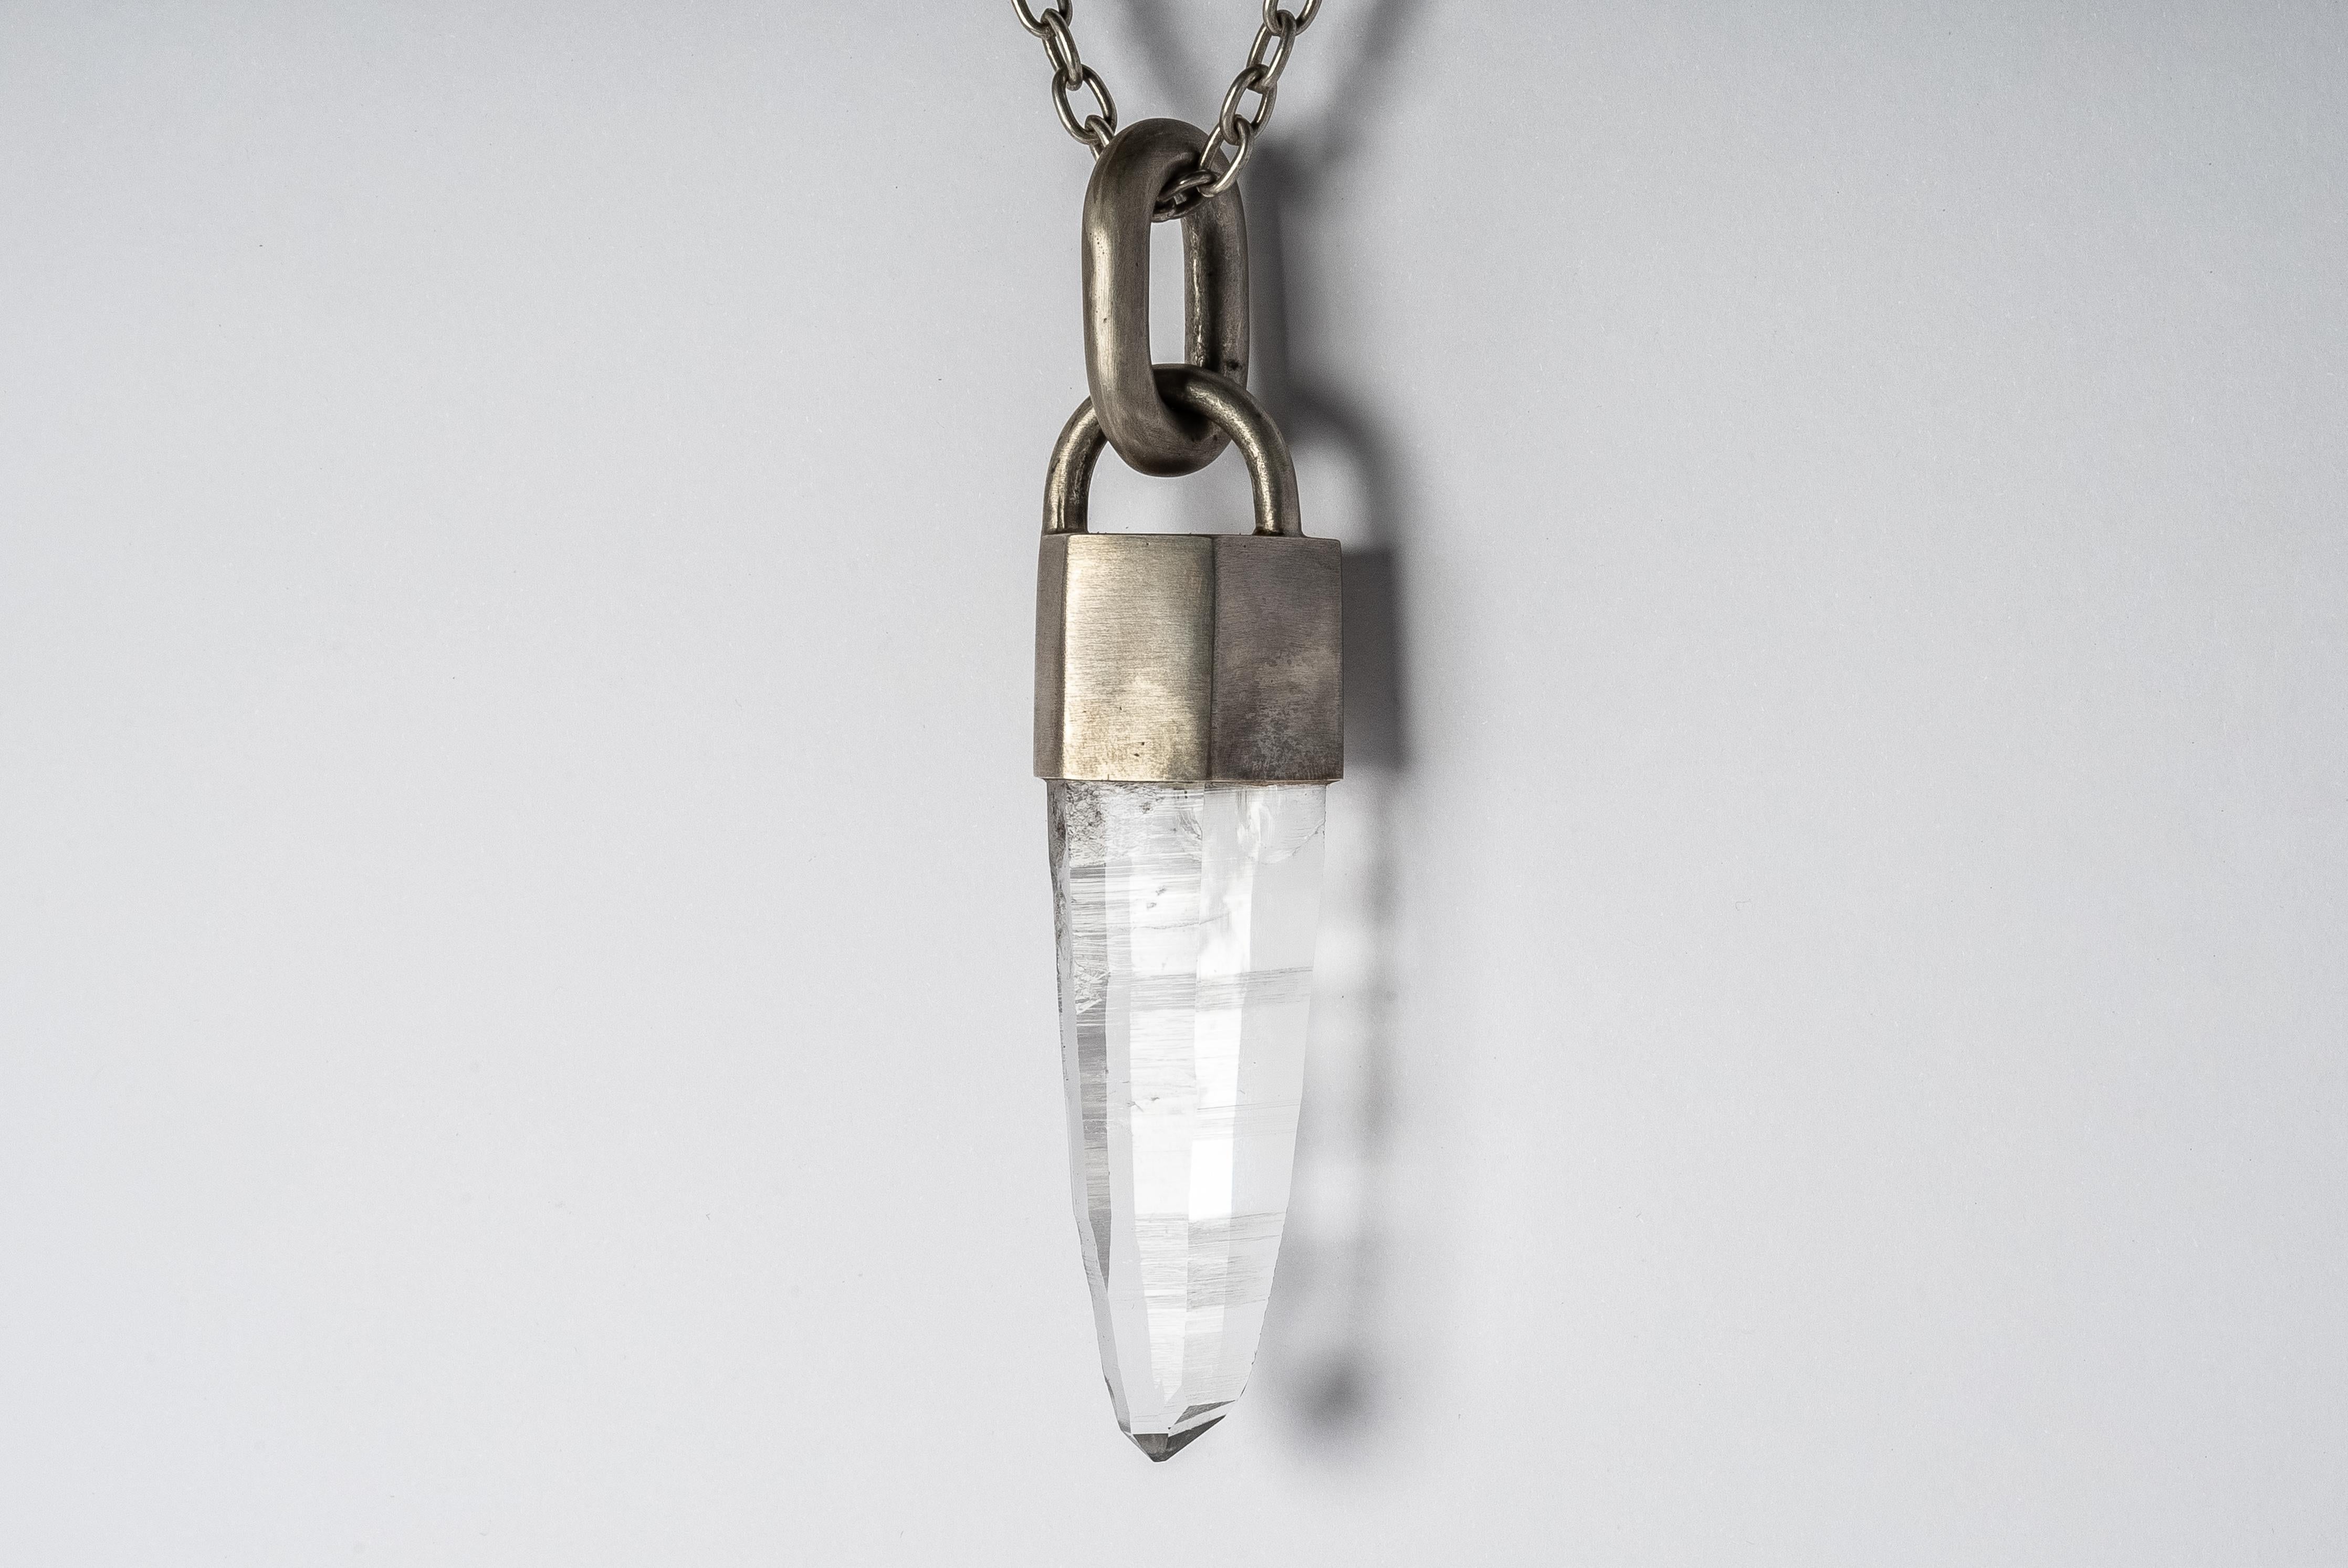 Necklace in acid treated sterling silver and a slab of rough lemurian quartz. The Talisman series is an exploration into the power of natural crystals. Tools for Magic. The crystals used in these pieces are discovered through adventure and are hand